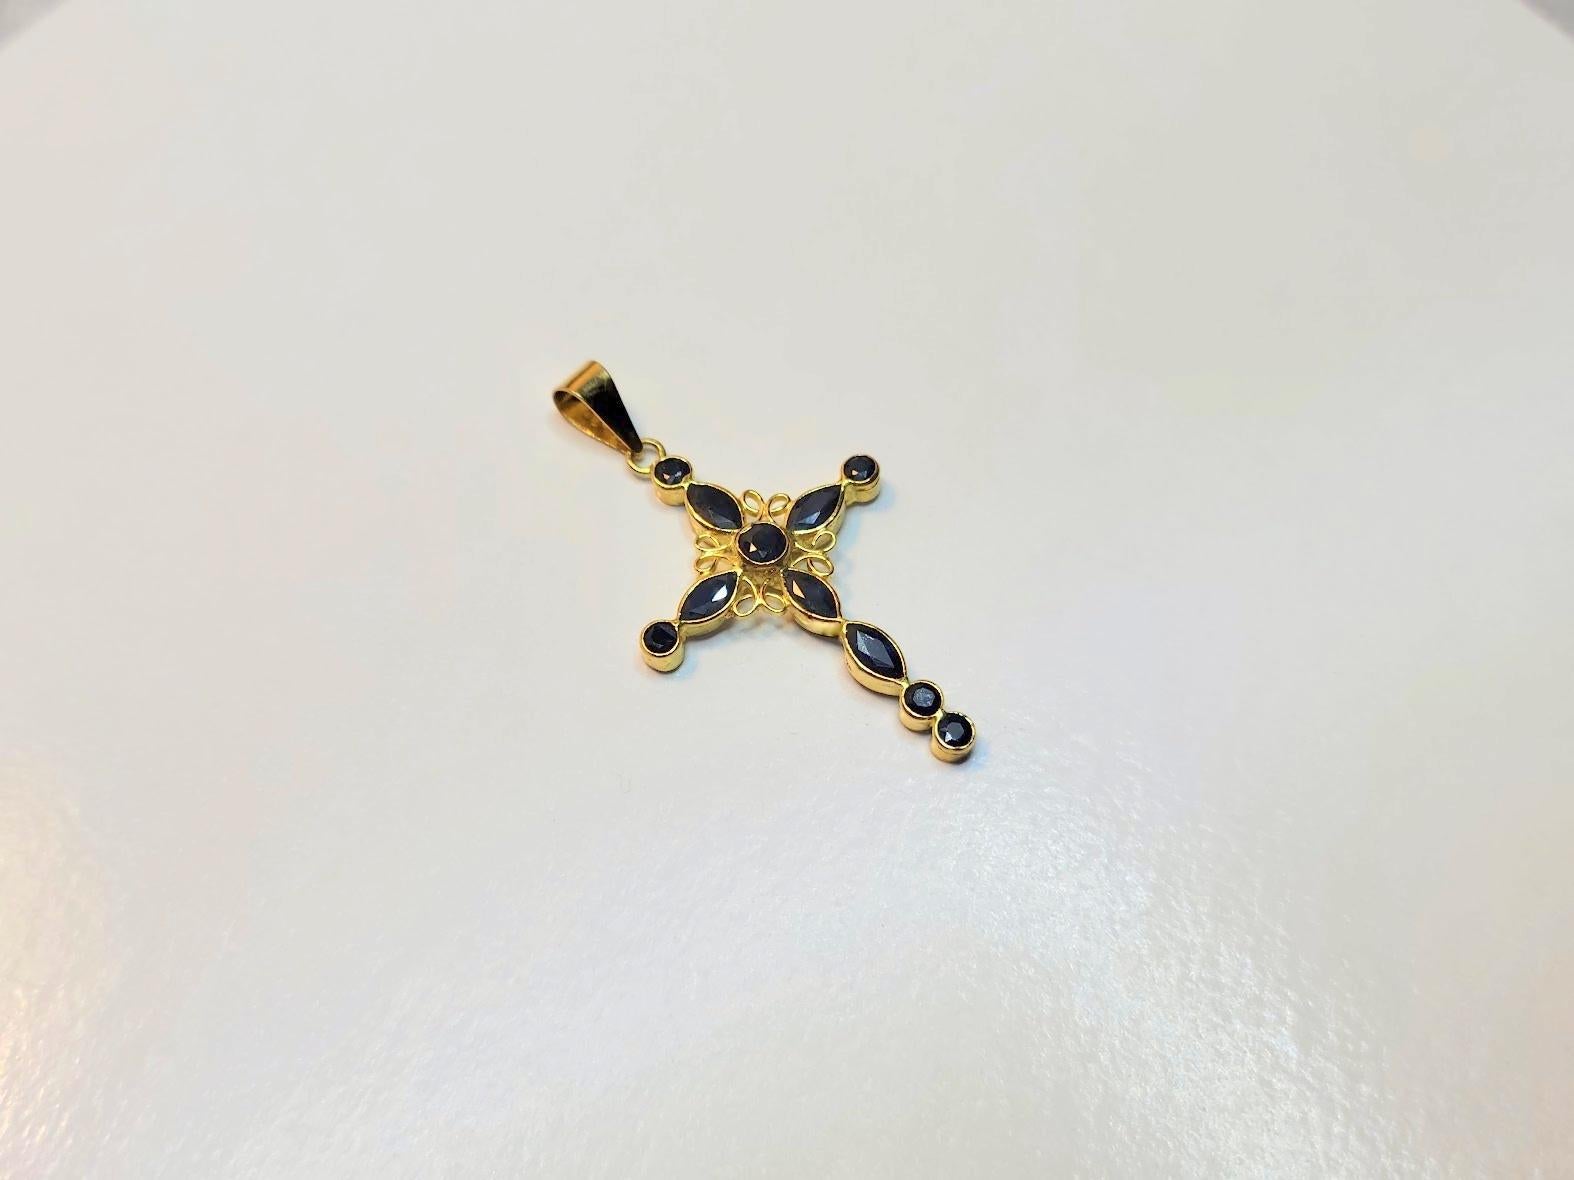 Stunning gold cross pendant with 11 blue sapphires.
Marked with 750 gold or 18 Karat.
Five faceted round sapphire cabochons. The size of one cabochon is 1.5 mm (0.018 carats)
One faceted round sapphire cabochon size - 2 mm (0.04 carats)
Five